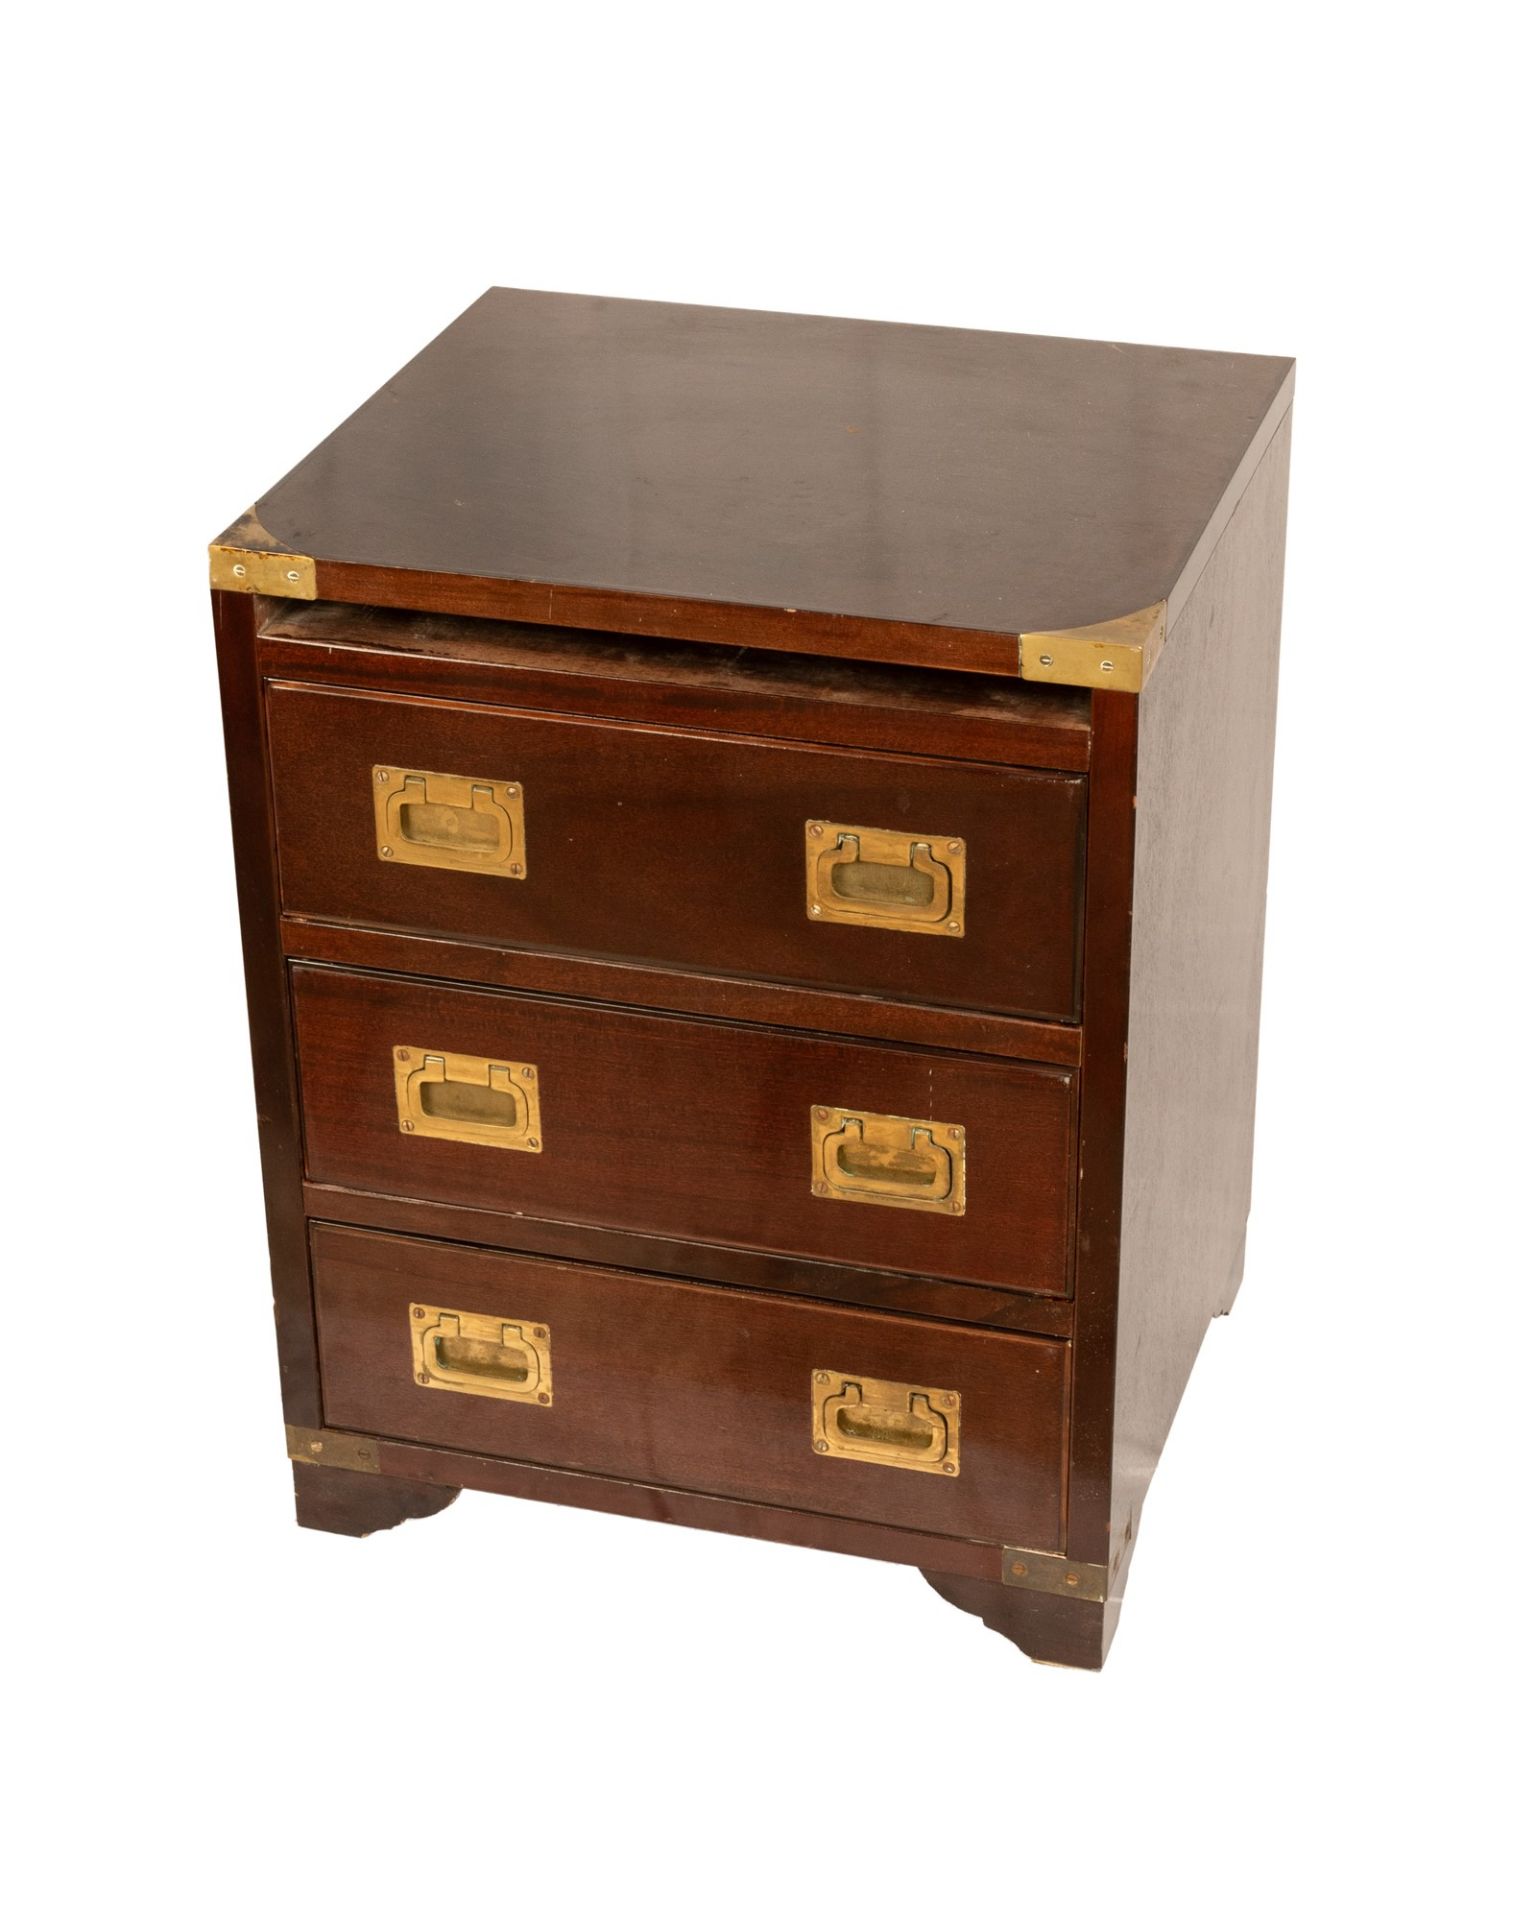 Antica Marina wooden bedside table with brass inserts - Image 19 of 23